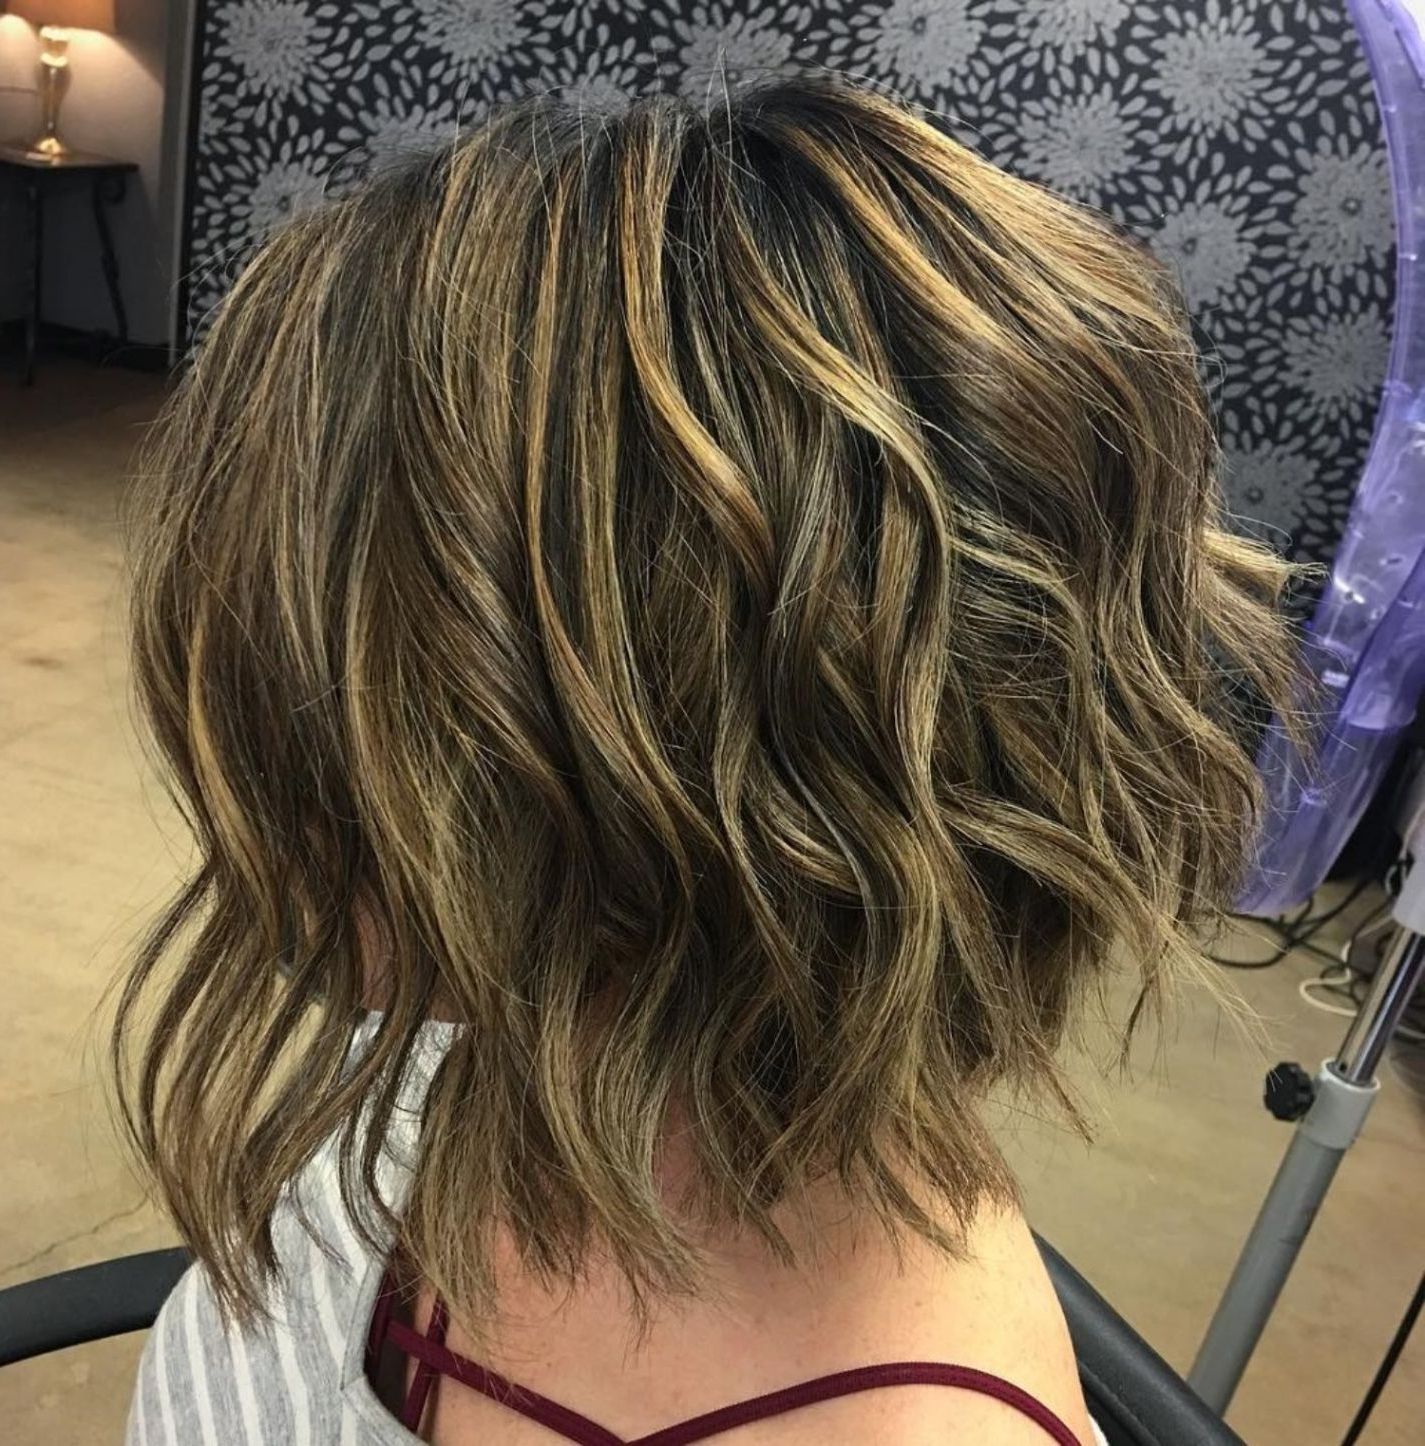 Hair Regarding Recent Messy Disconnected Brunette Bob Hairstyles (View 5 of 20)